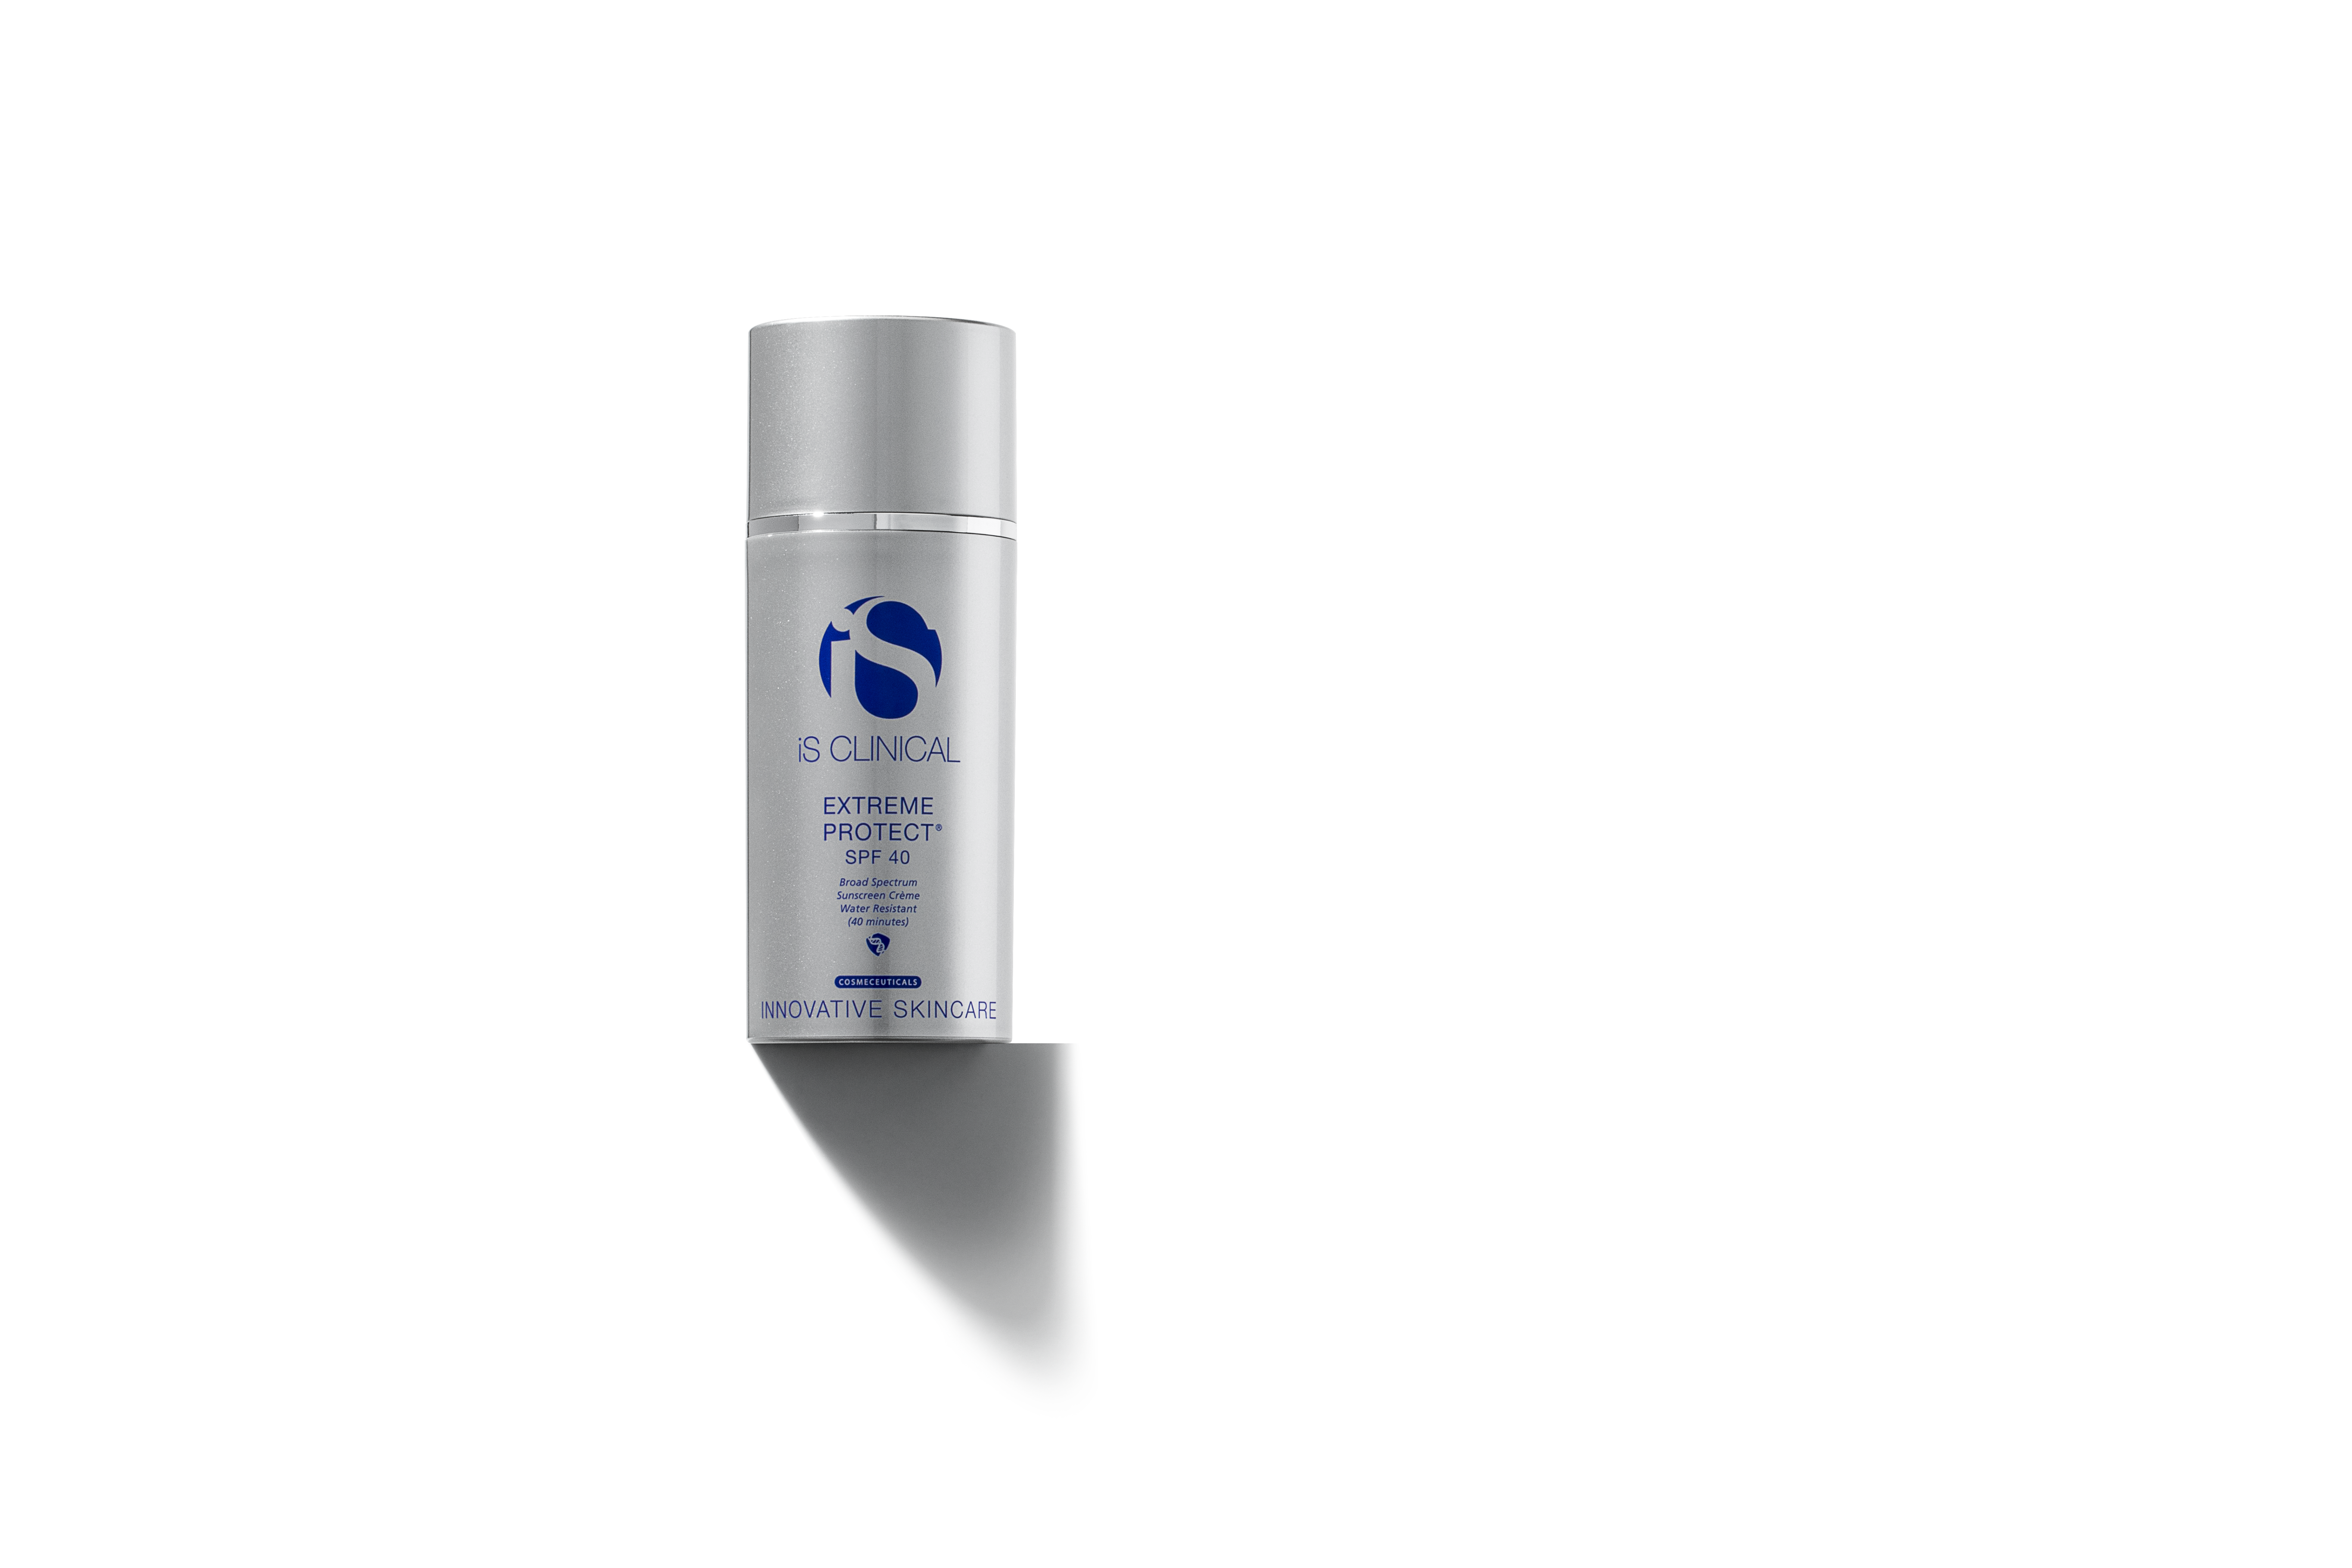 'EXTREME PROTECT® SPF 40